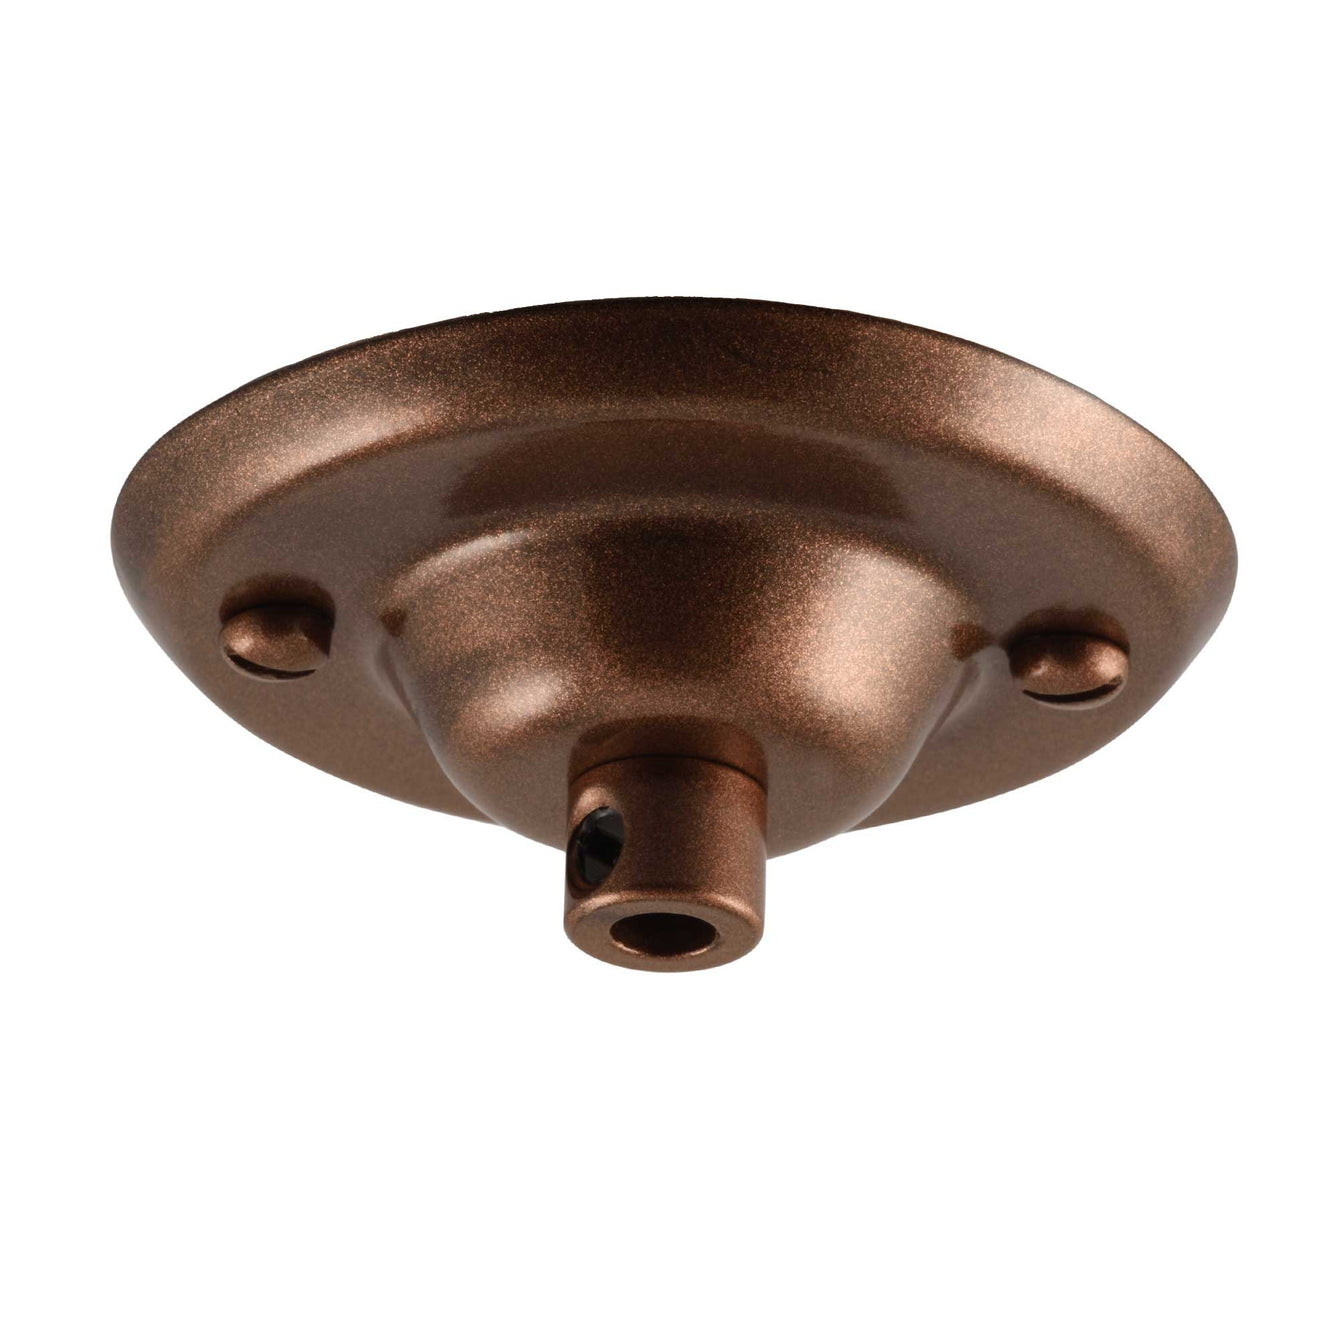 ElekTek 75mm Diameter Ceiling Plate with Cord Grip Metallic Finishes Powder Coated Colours Antique White